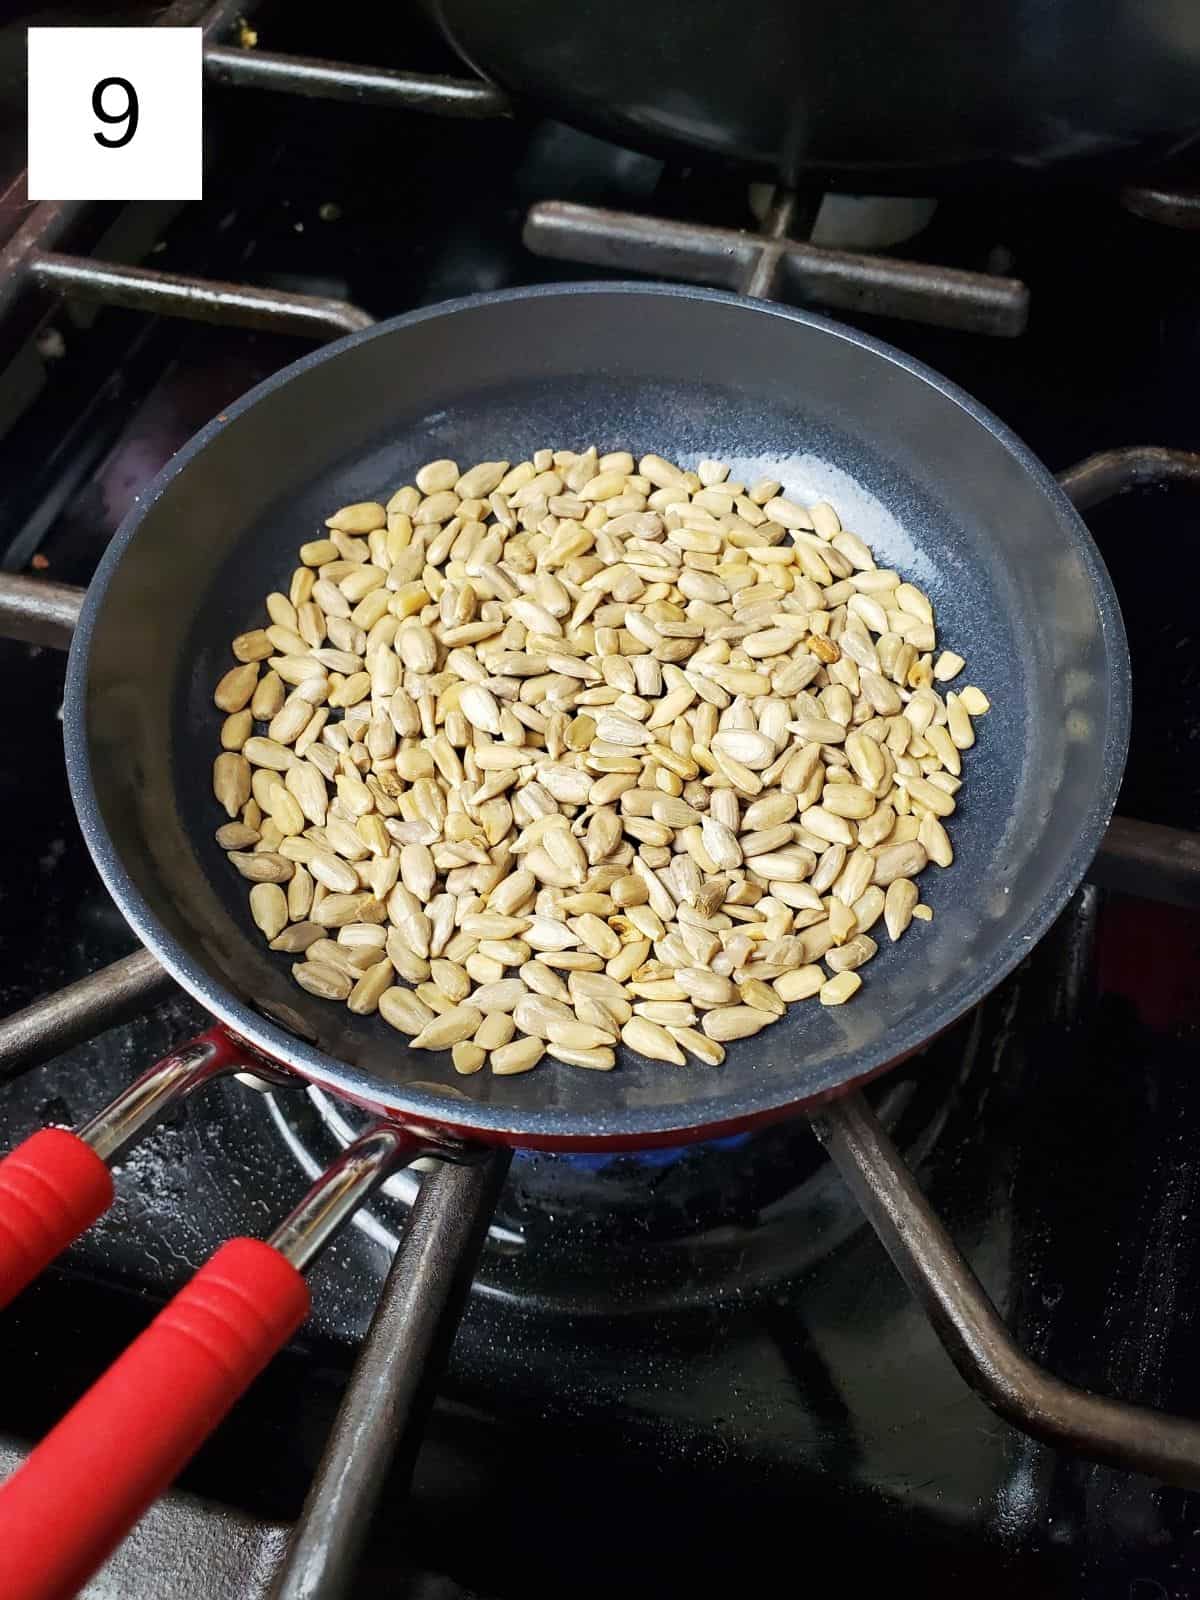 raw sunflower seeds in a pan.